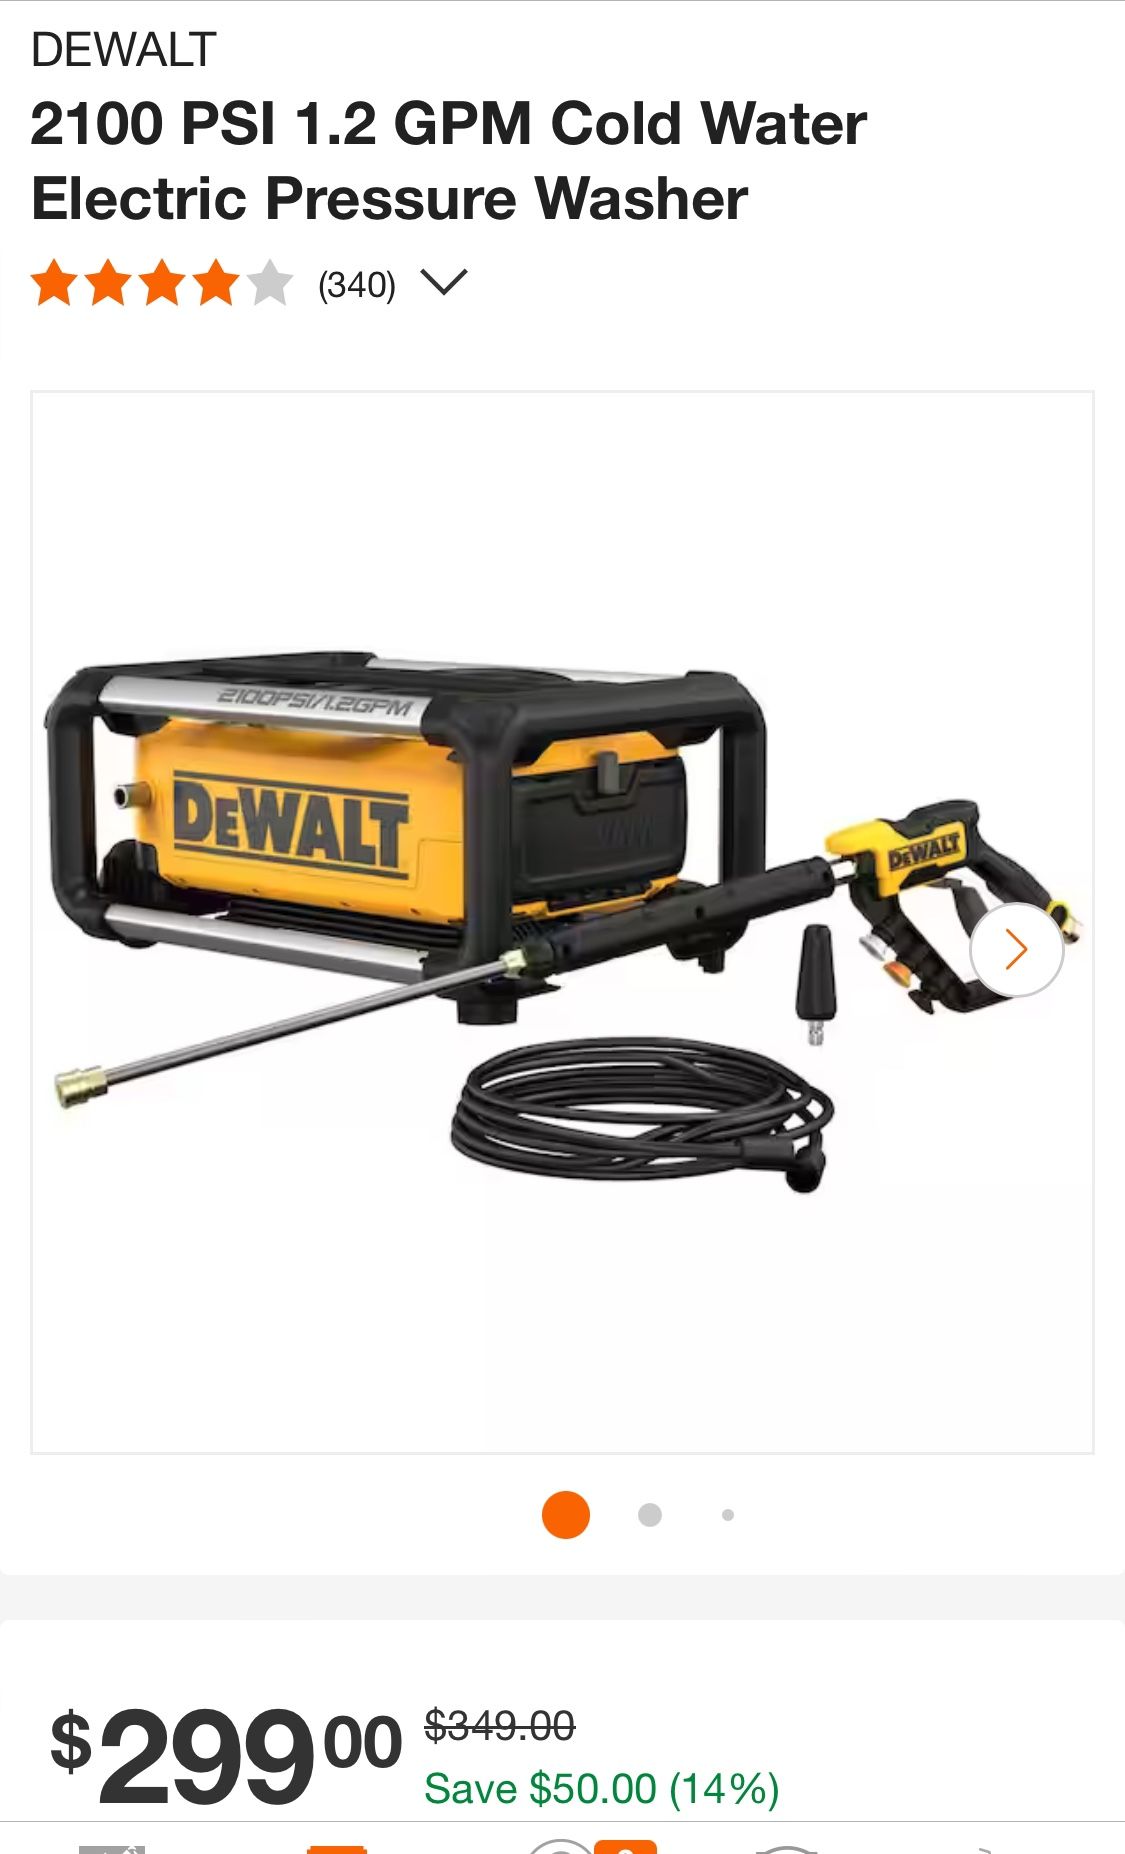  2100 PSI 1.2 GPM Cold Water Electric Pressure Washer